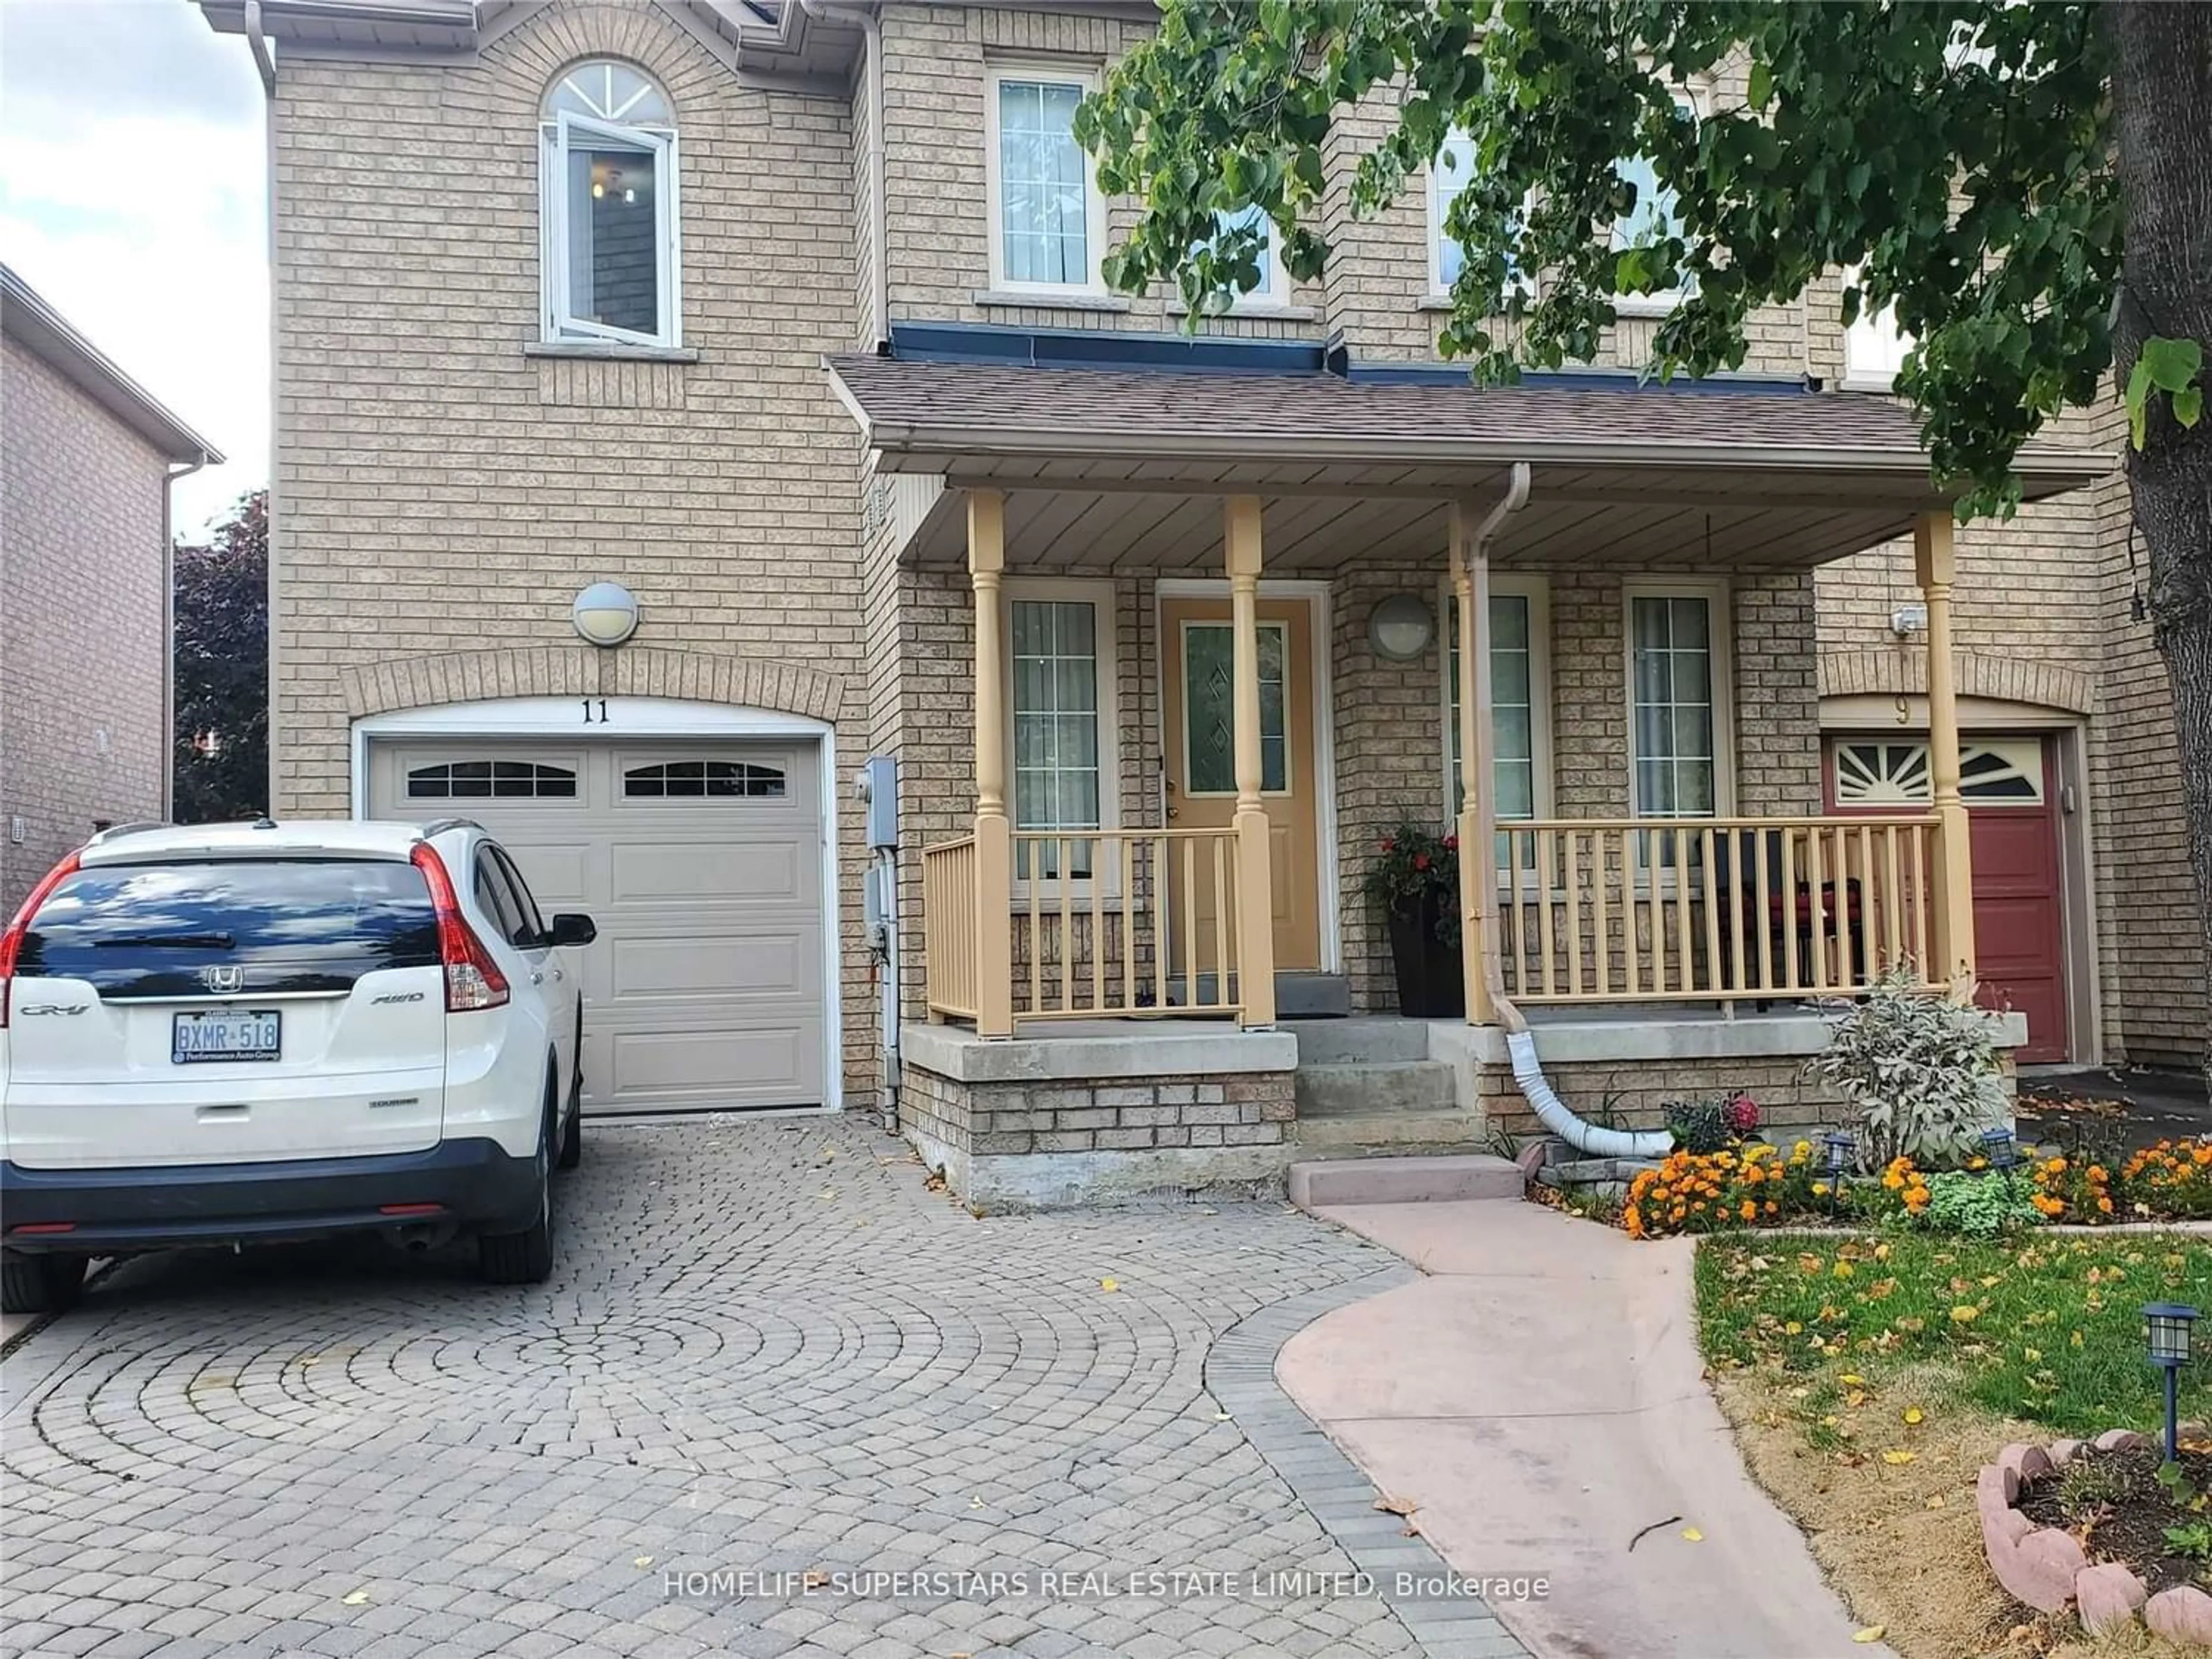 Home with brick exterior material for 11 Giraffe Ave, Brampton Ontario L6R 1Y8